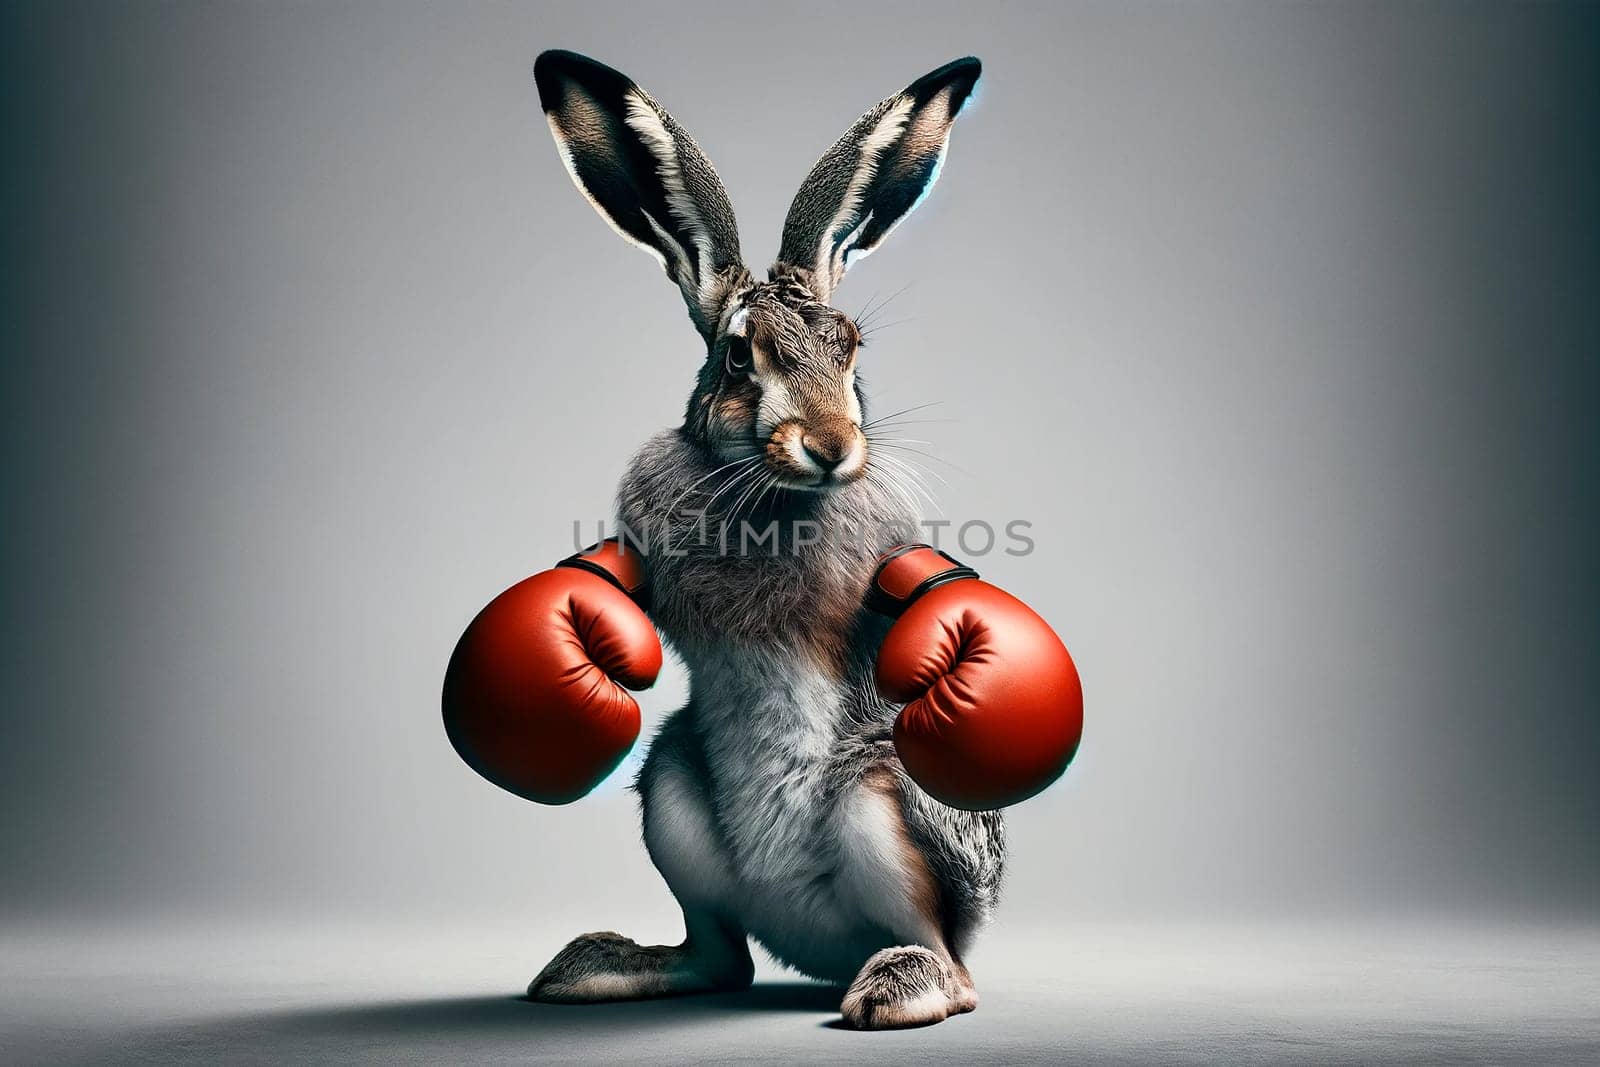 A hare in boxing gloves stands on his hind legs on a gray background.